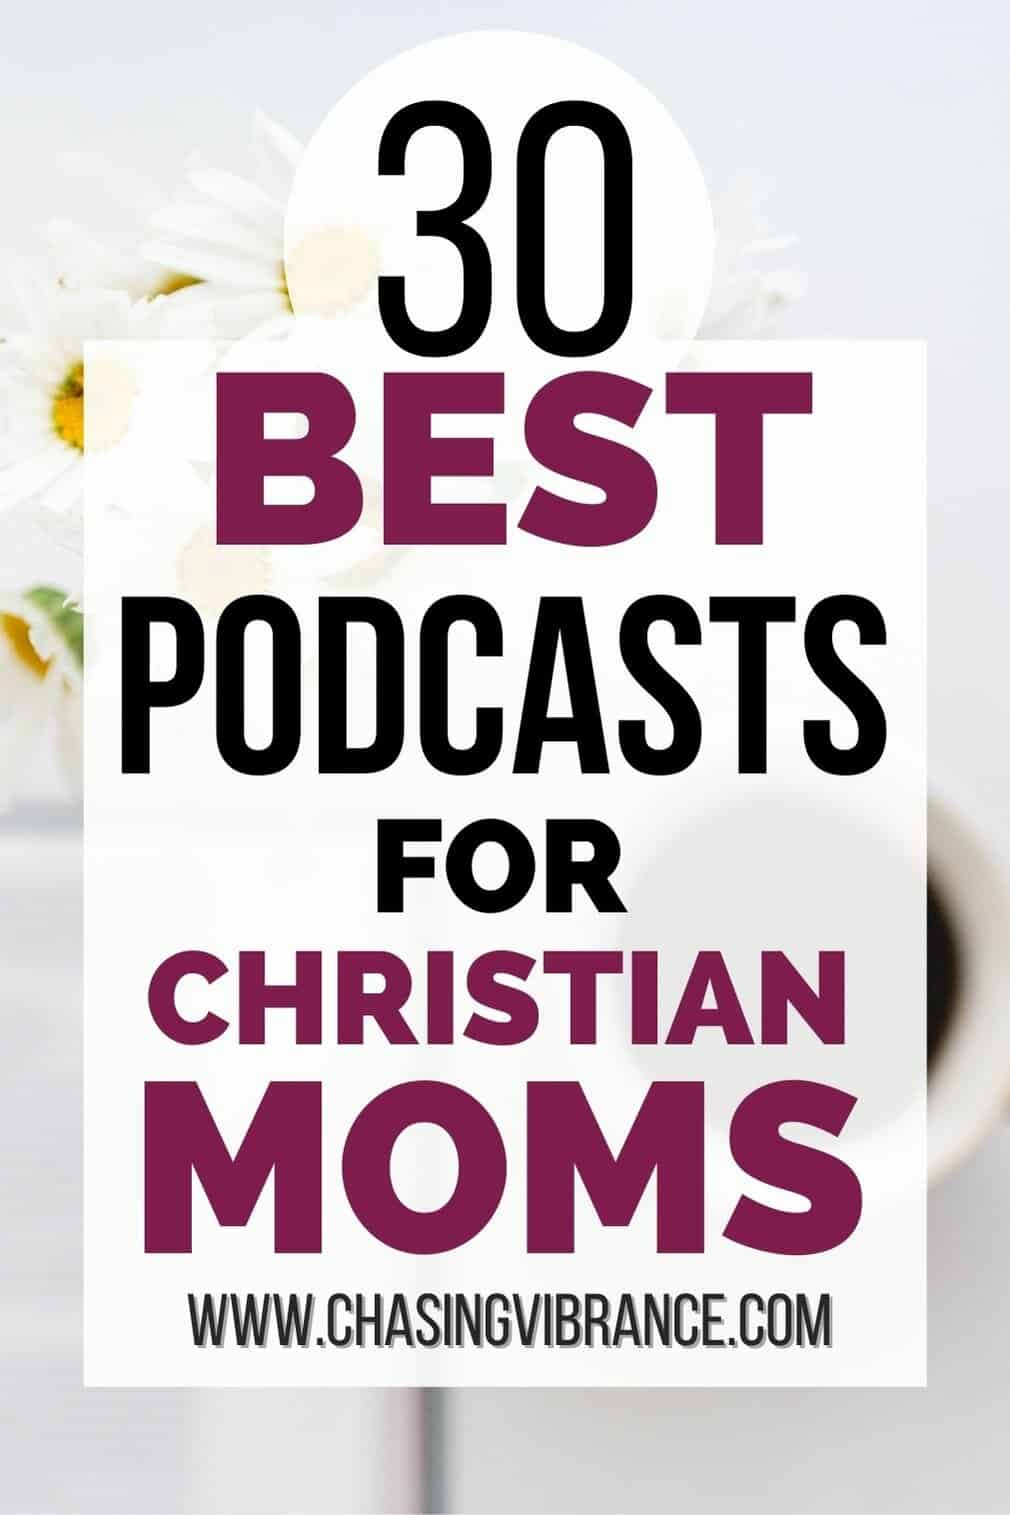 The 30 Best Podcasts for Christian Moms